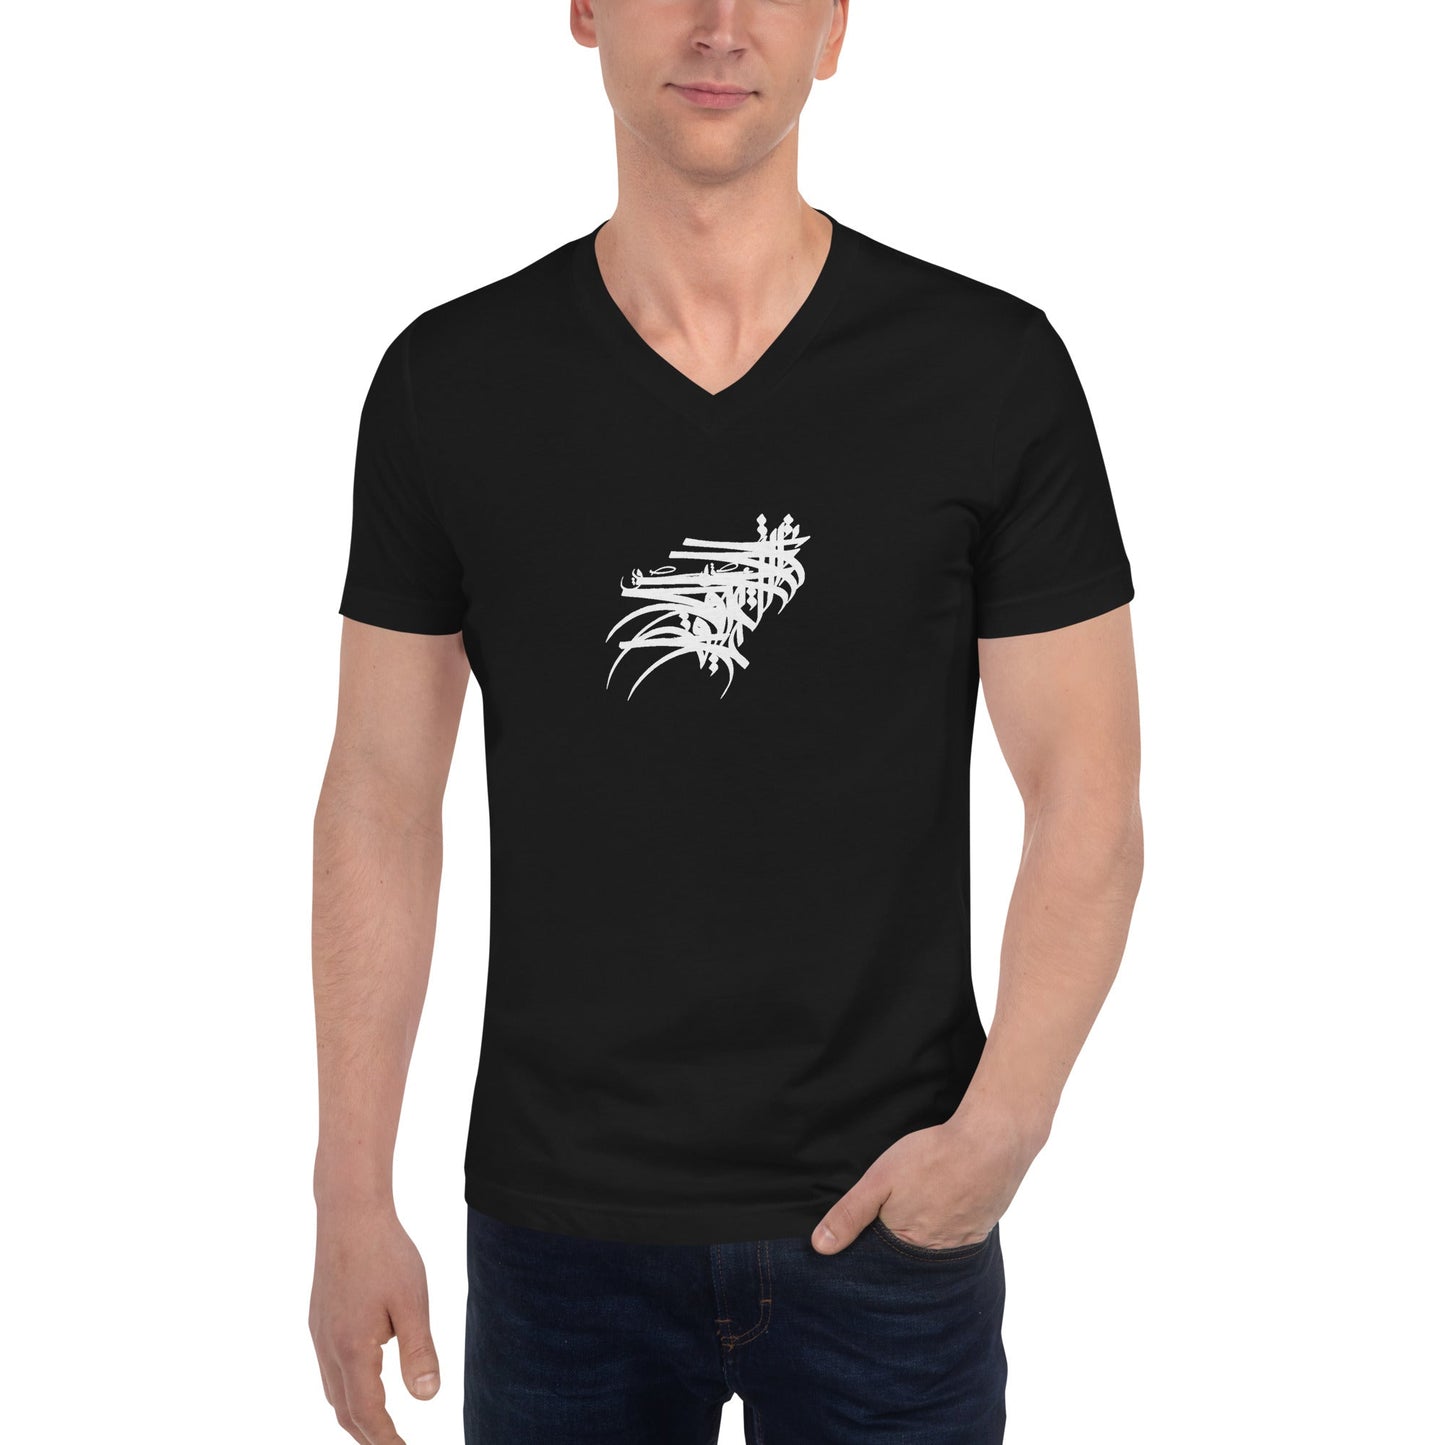 mens-vneck-tshirt-you-are-not-alone-black